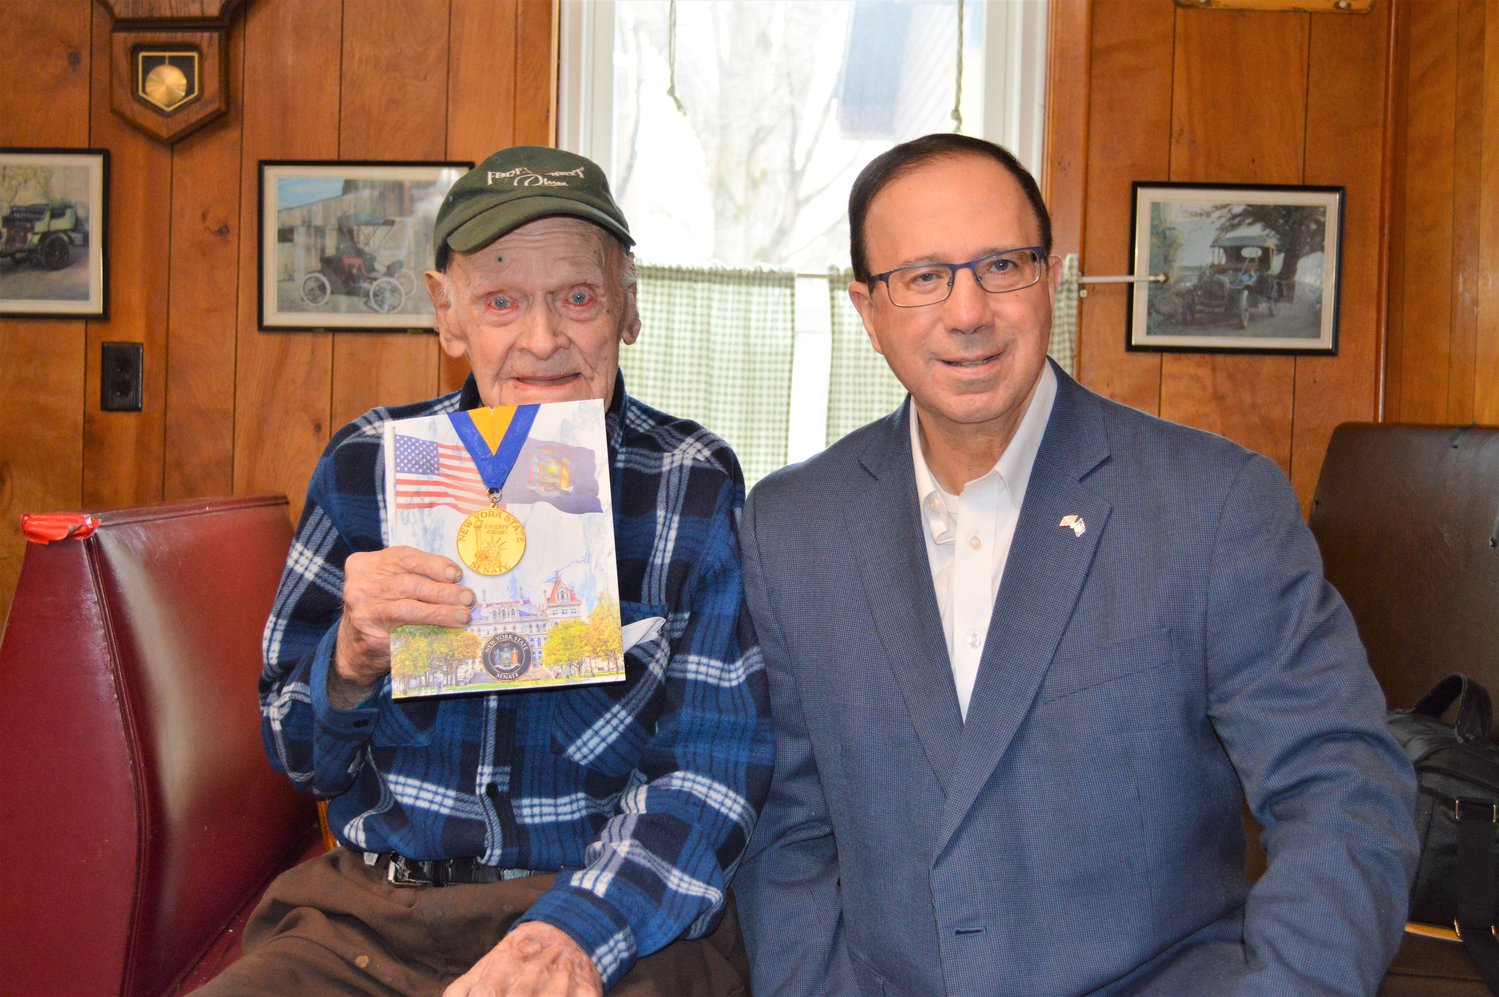 Terrence “Terry” Larkin, left, a World War II veteran who lives in Forestport, receives a New York State Senate Liberty Medal from Sen. Joseph A. Griffo, R-53, Rome, on Thursday at the Forestport diner.